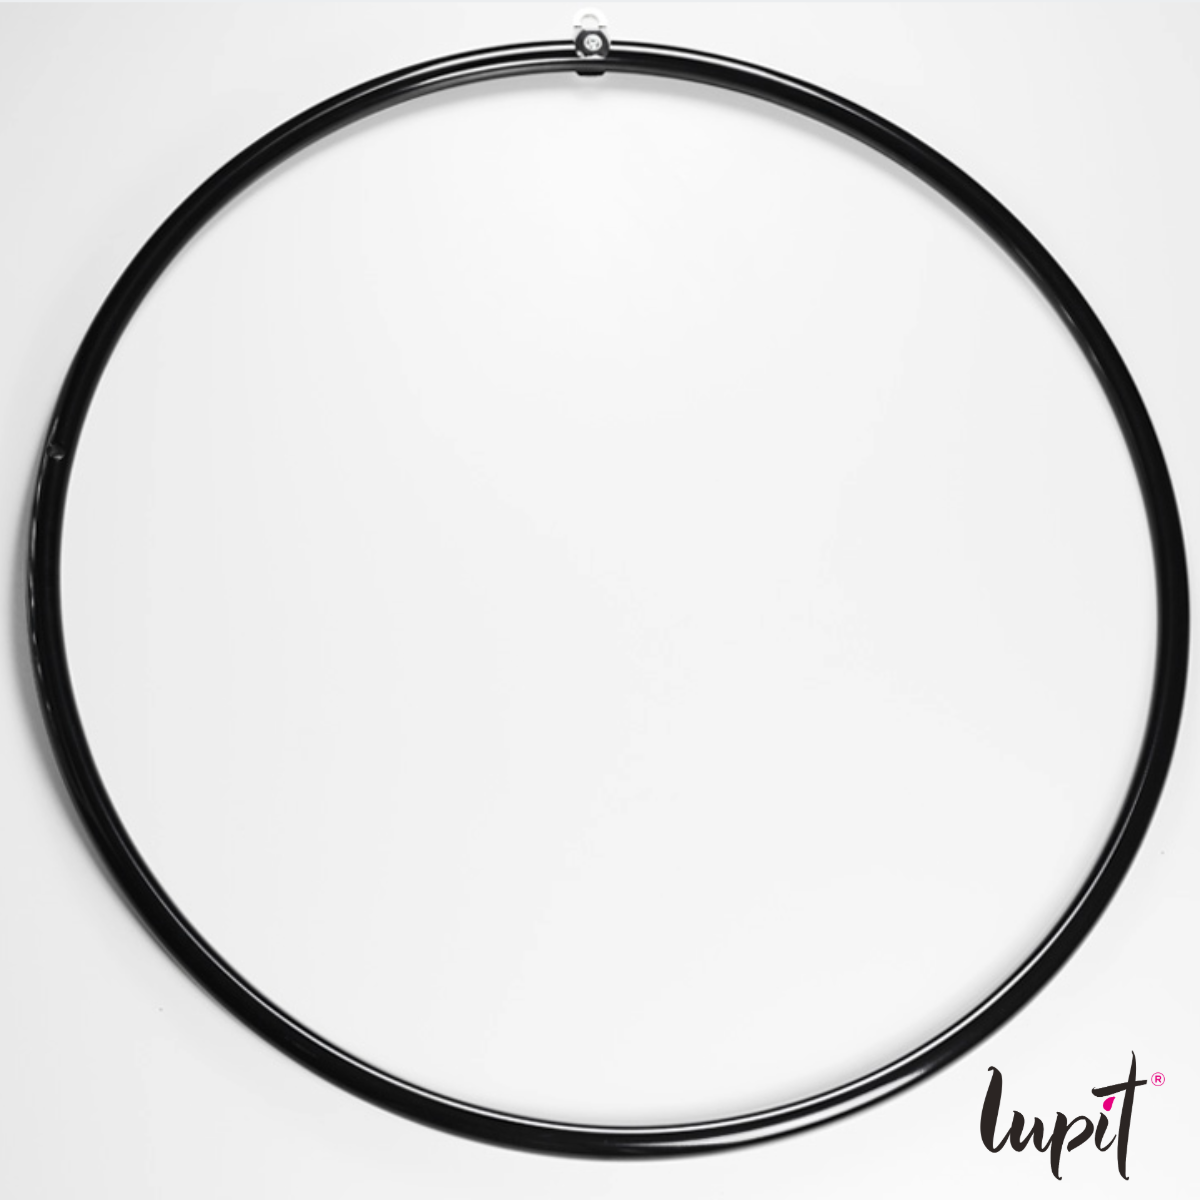 Lupit Aerial Accessoires | Hoop/Lyra IPSF Rigging Mount